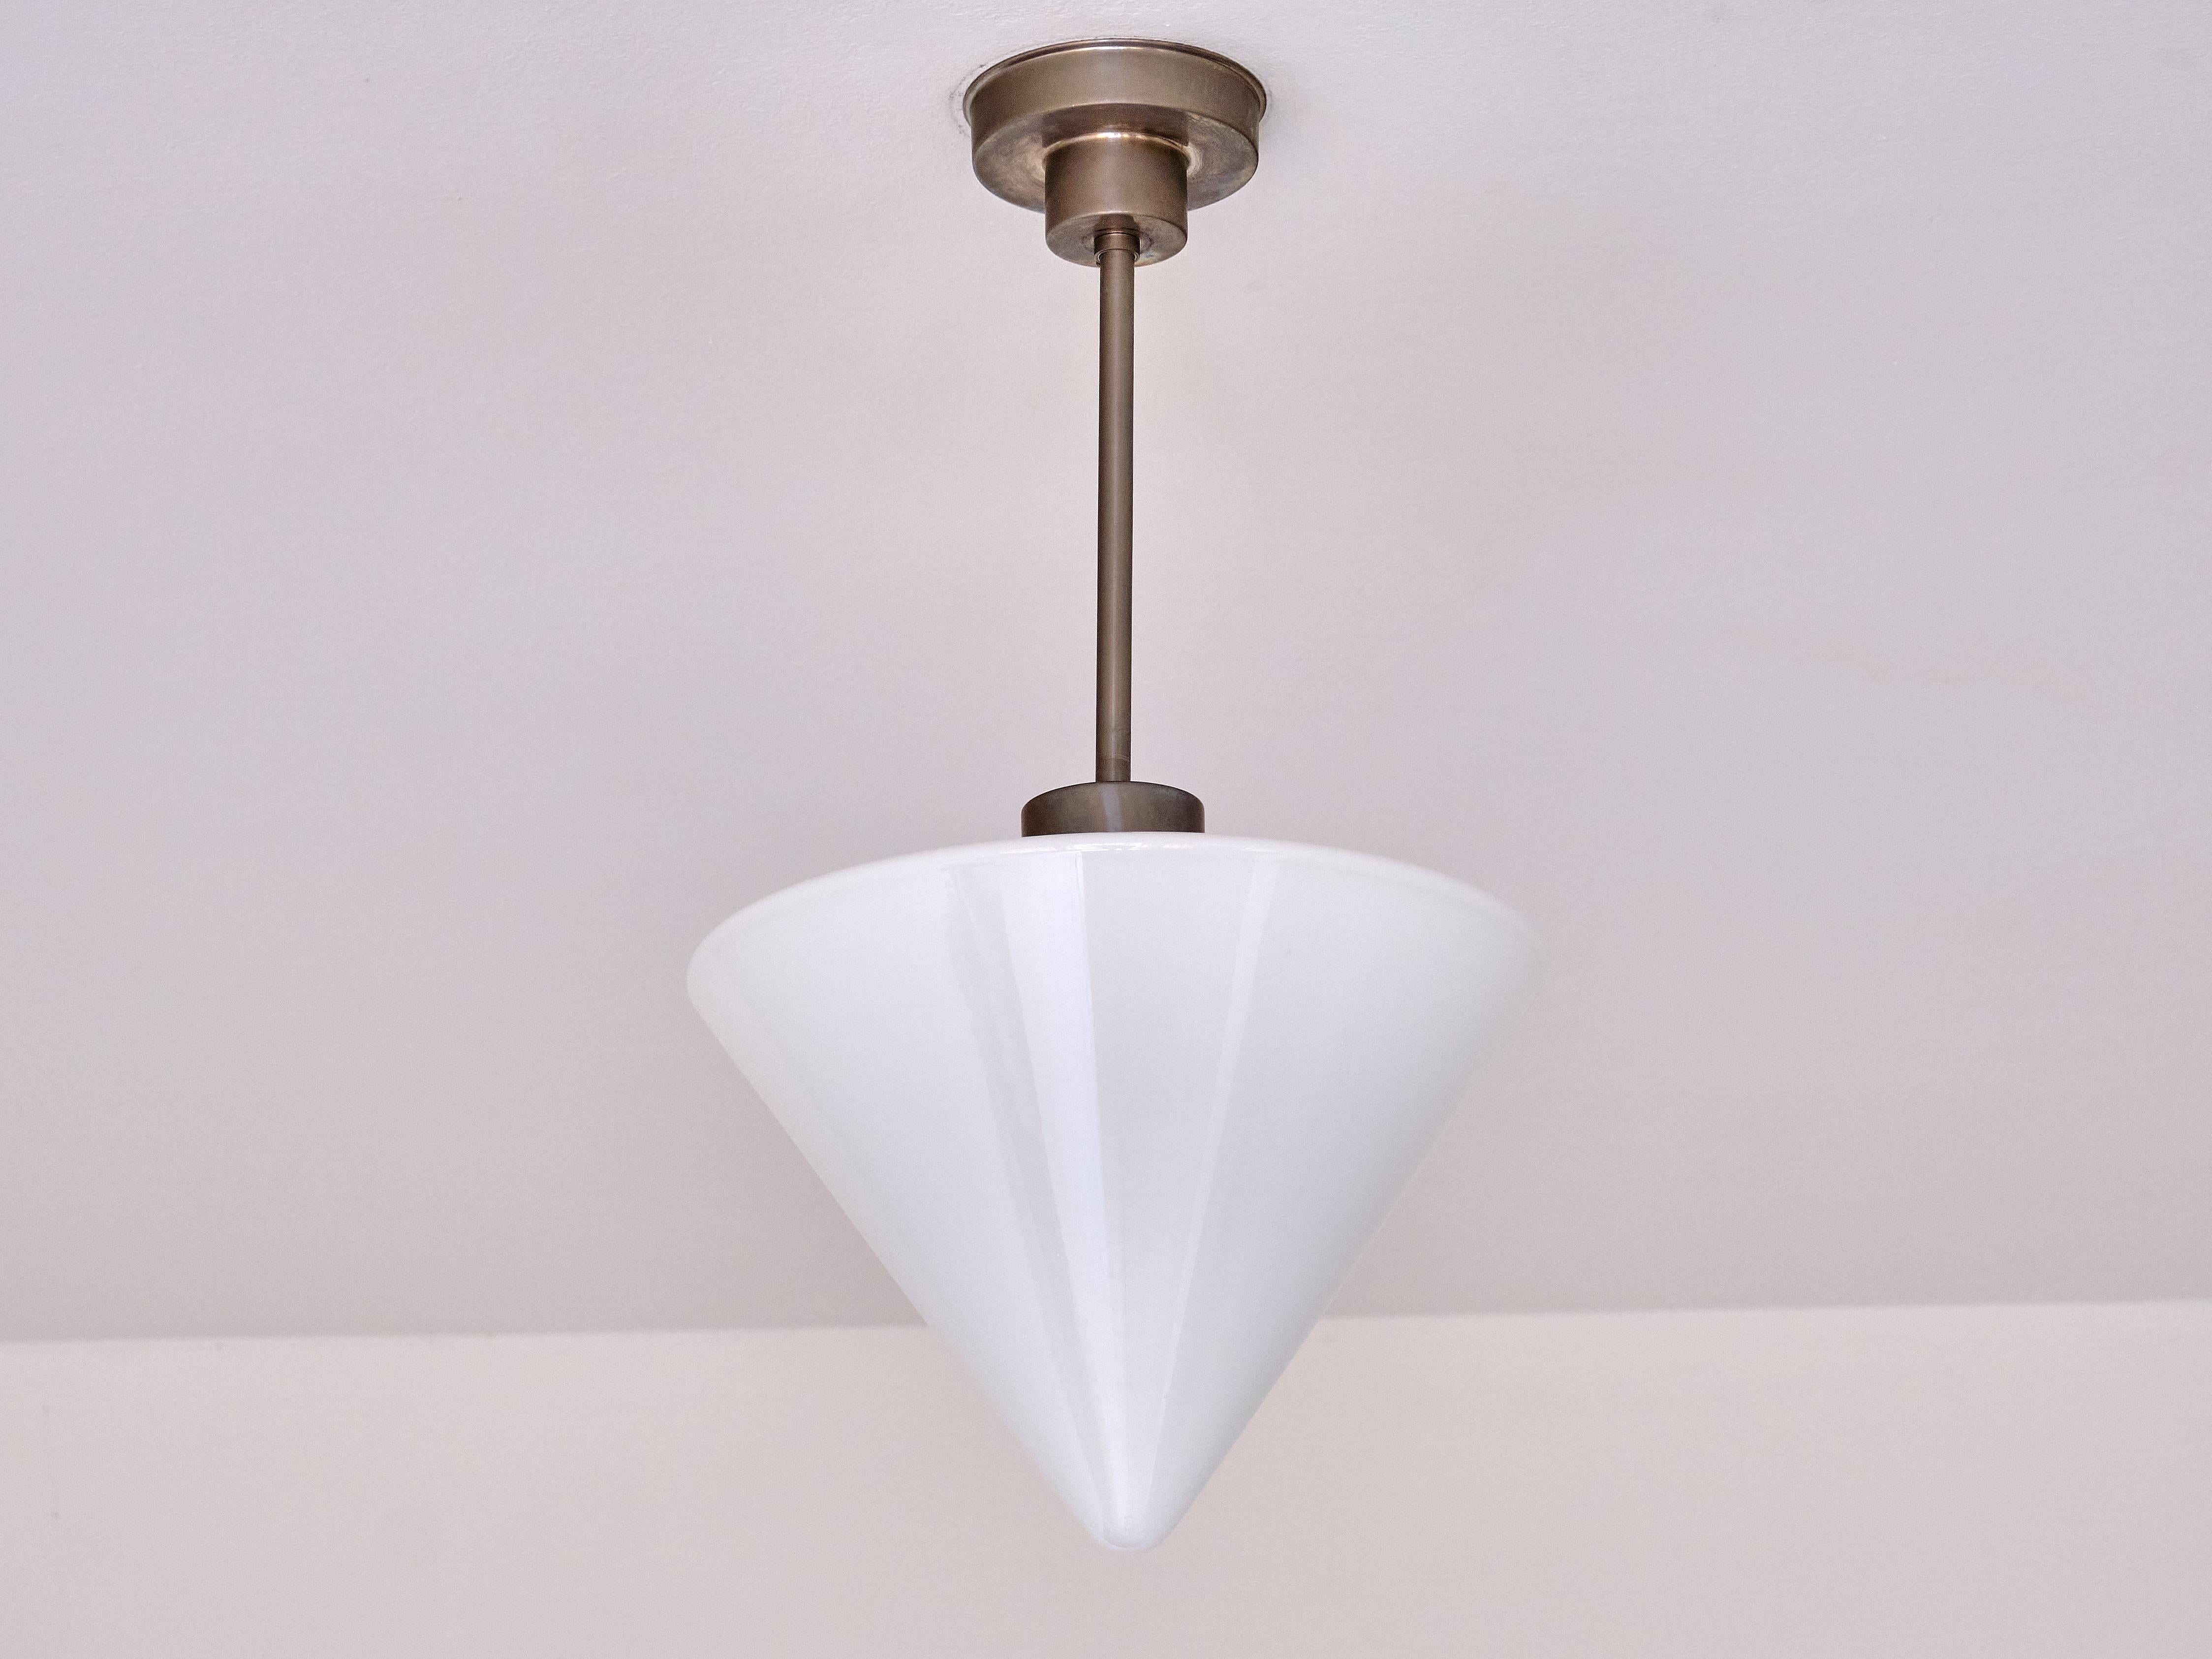 Gispen Cone Shaped Pendant Light in Opal Glass and Nickel, Netherlands, 1930s For Sale 2